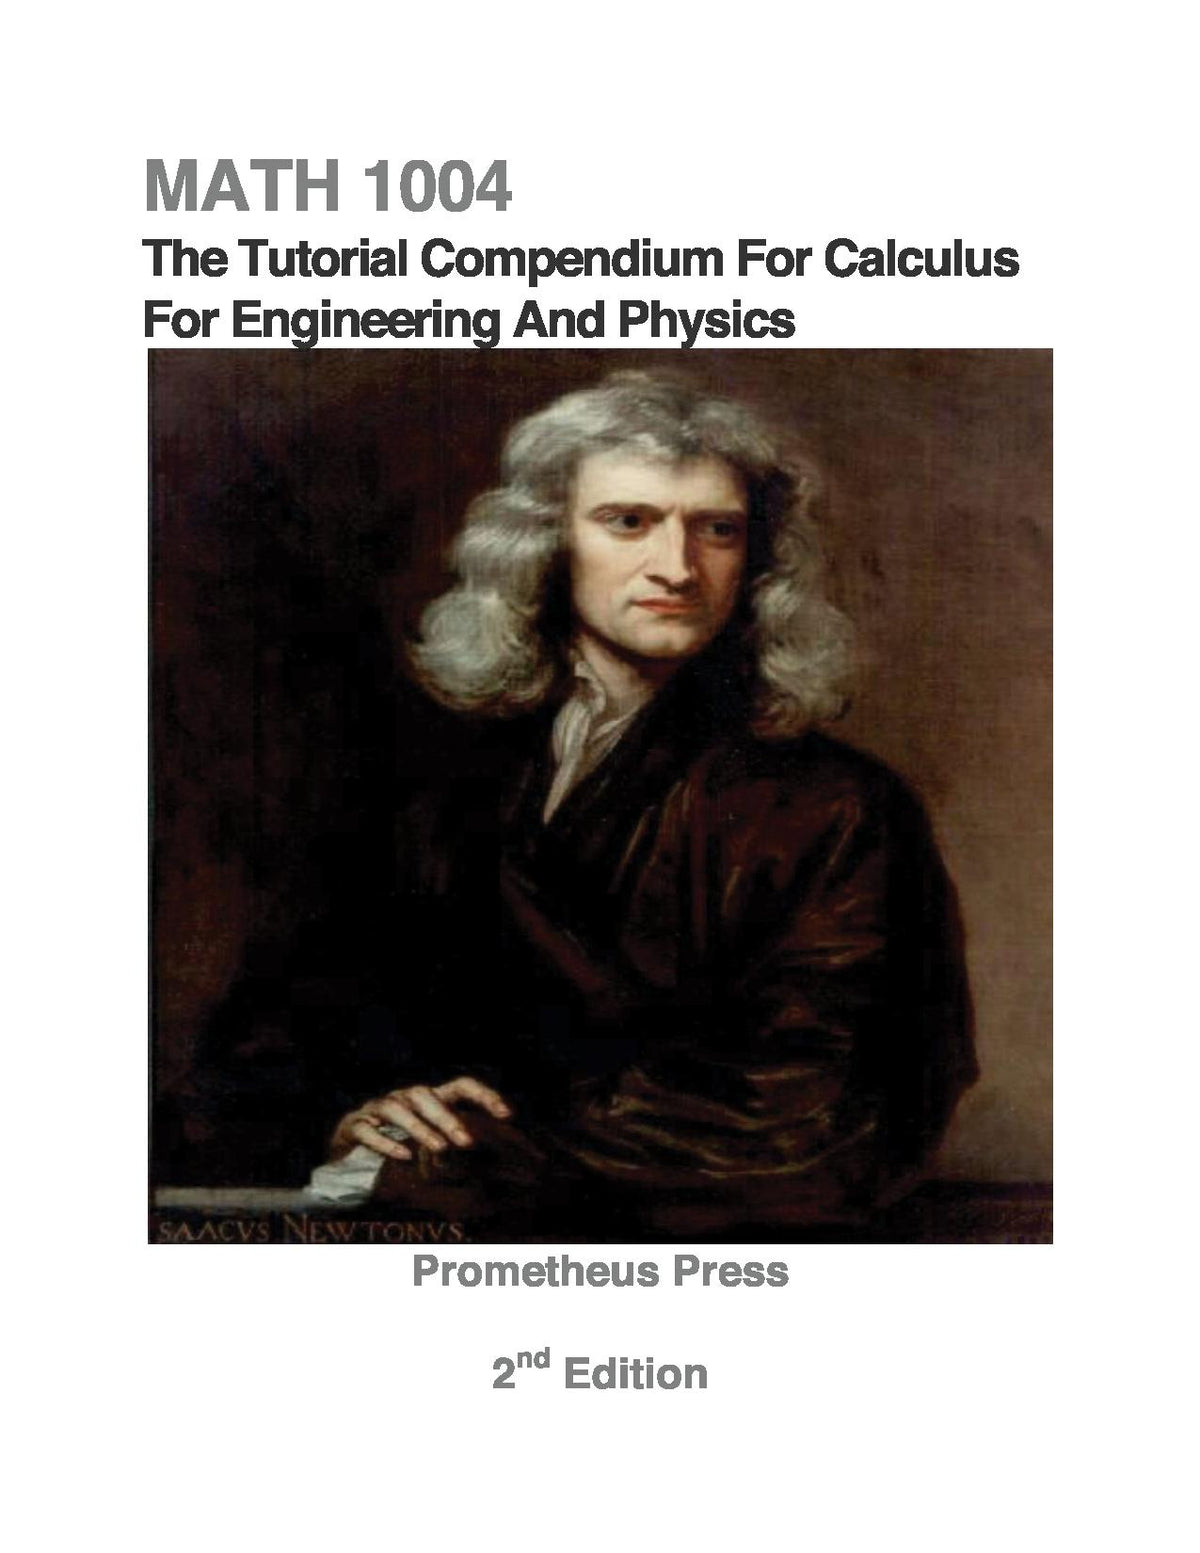 The Tutorial Compendium For Calculus For Engineering And Physics